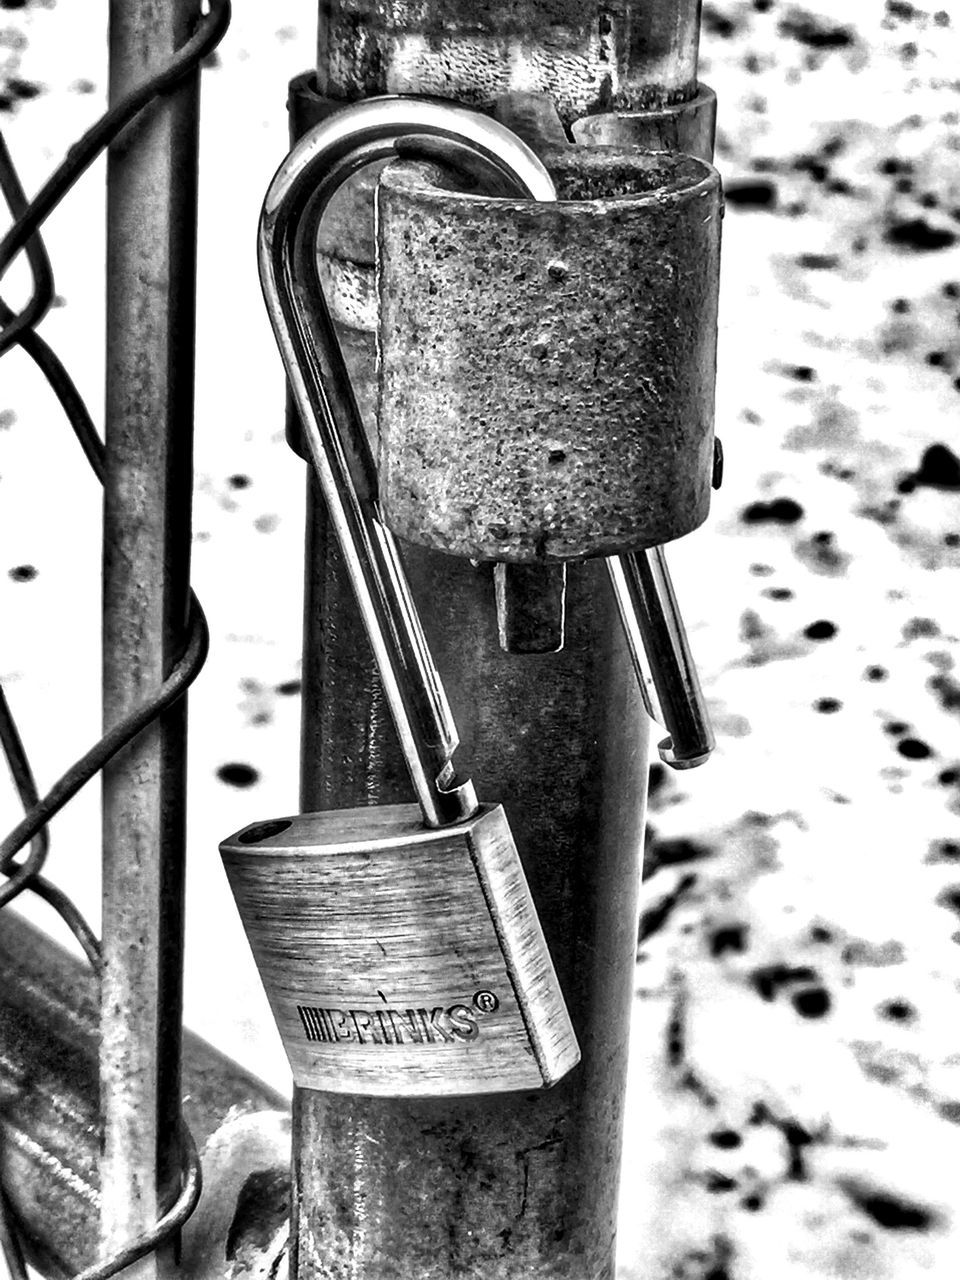 metal, focus on foreground, close-up, metallic, safety, protection, security, padlock, rusty, lock, pole, chain, day, fence, outdoors, no people, cold temperature, attached, snow, hanging